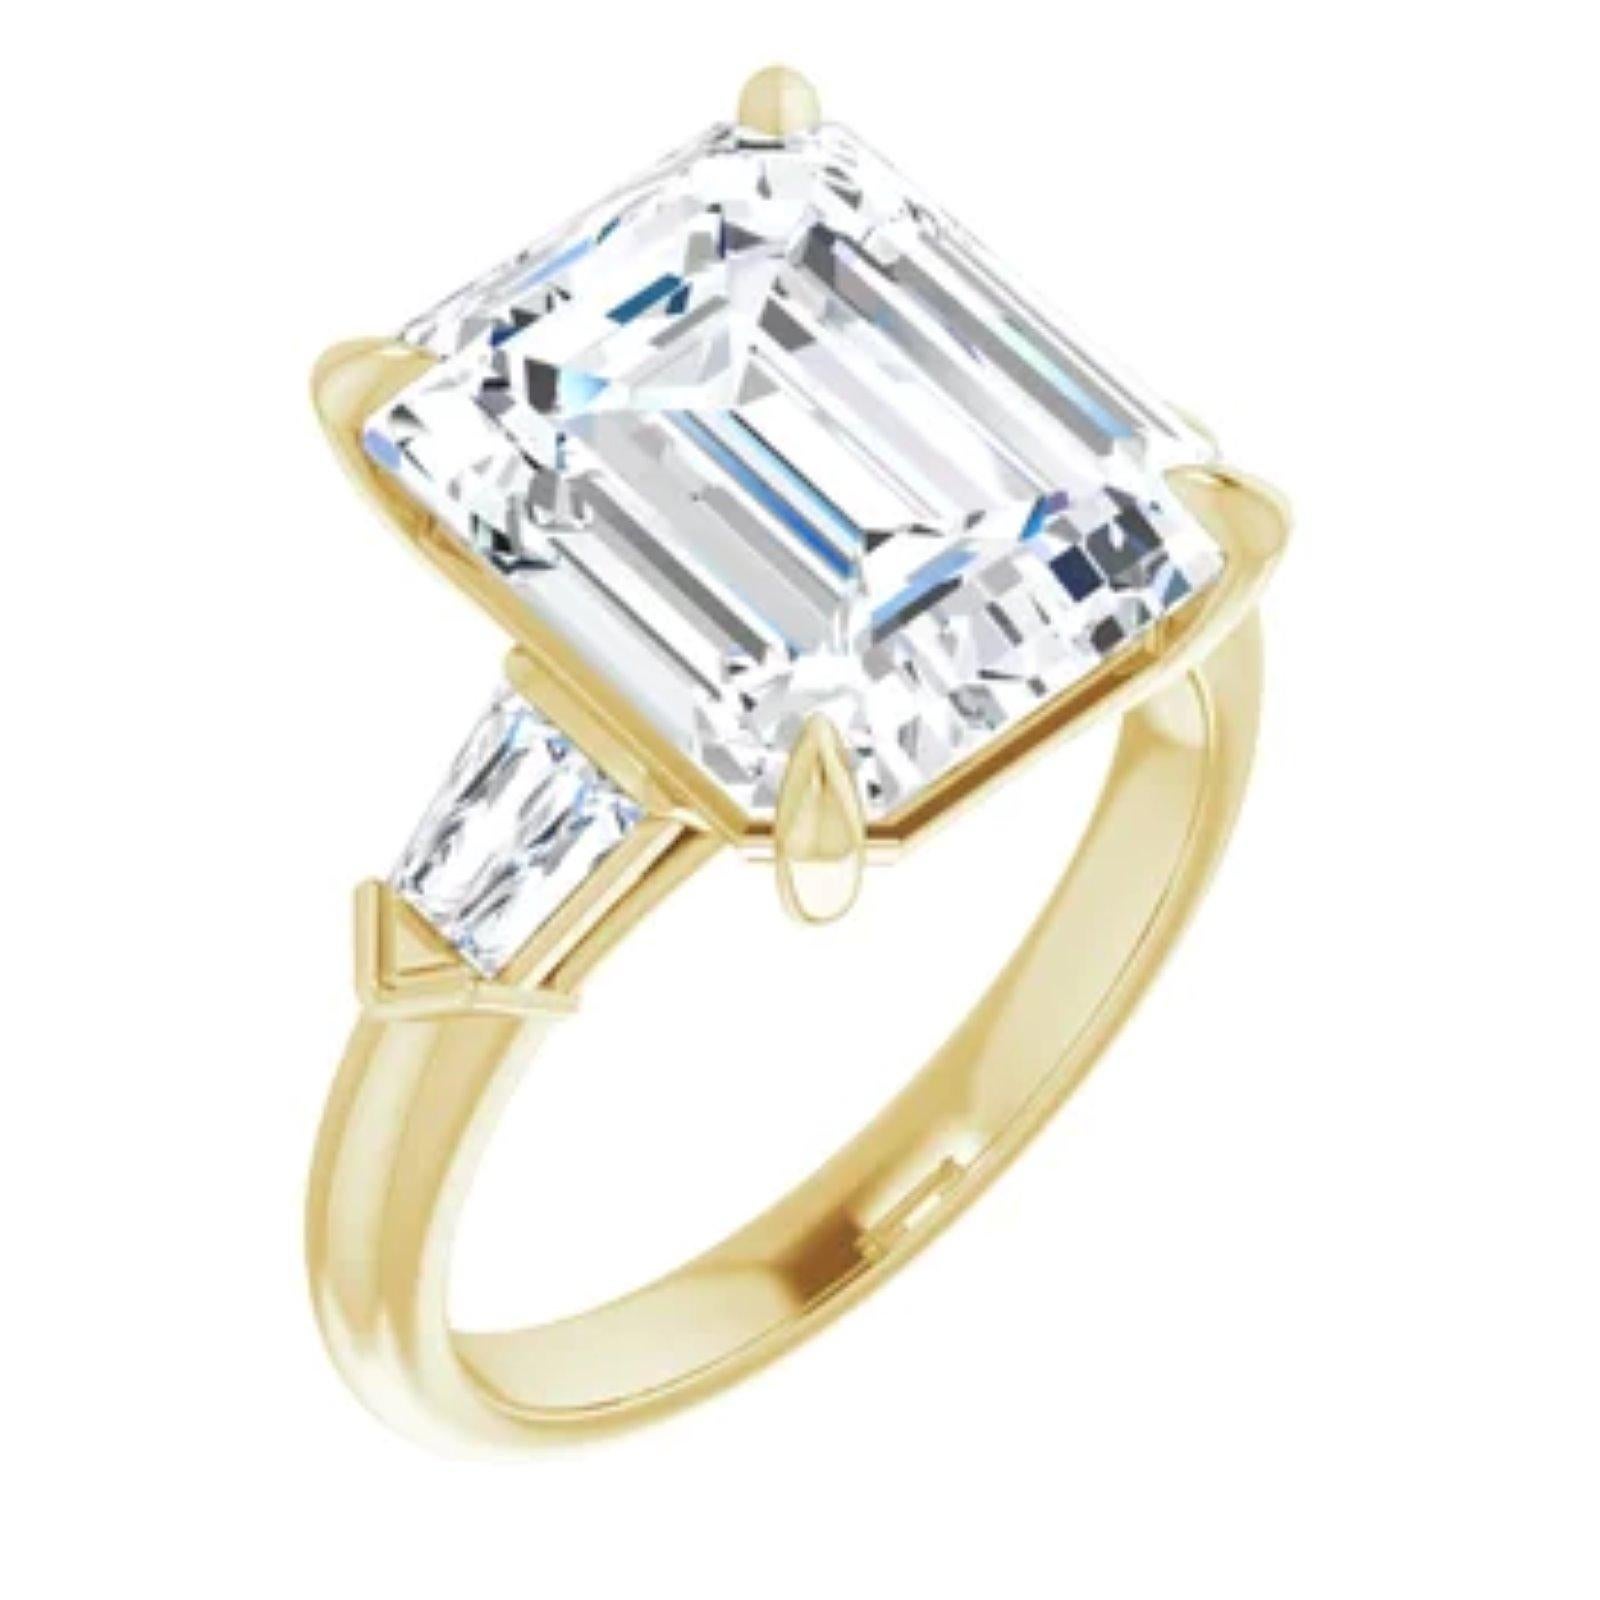 Erin gems & jewelry is delighted to bring you a magnificent emerald cut diamond made in 18k yellow gold. 

Entirely custom made to order, the diamond will be chosen by you the client. 12x10mm (6ct) you can choose the diamond colour and clarity